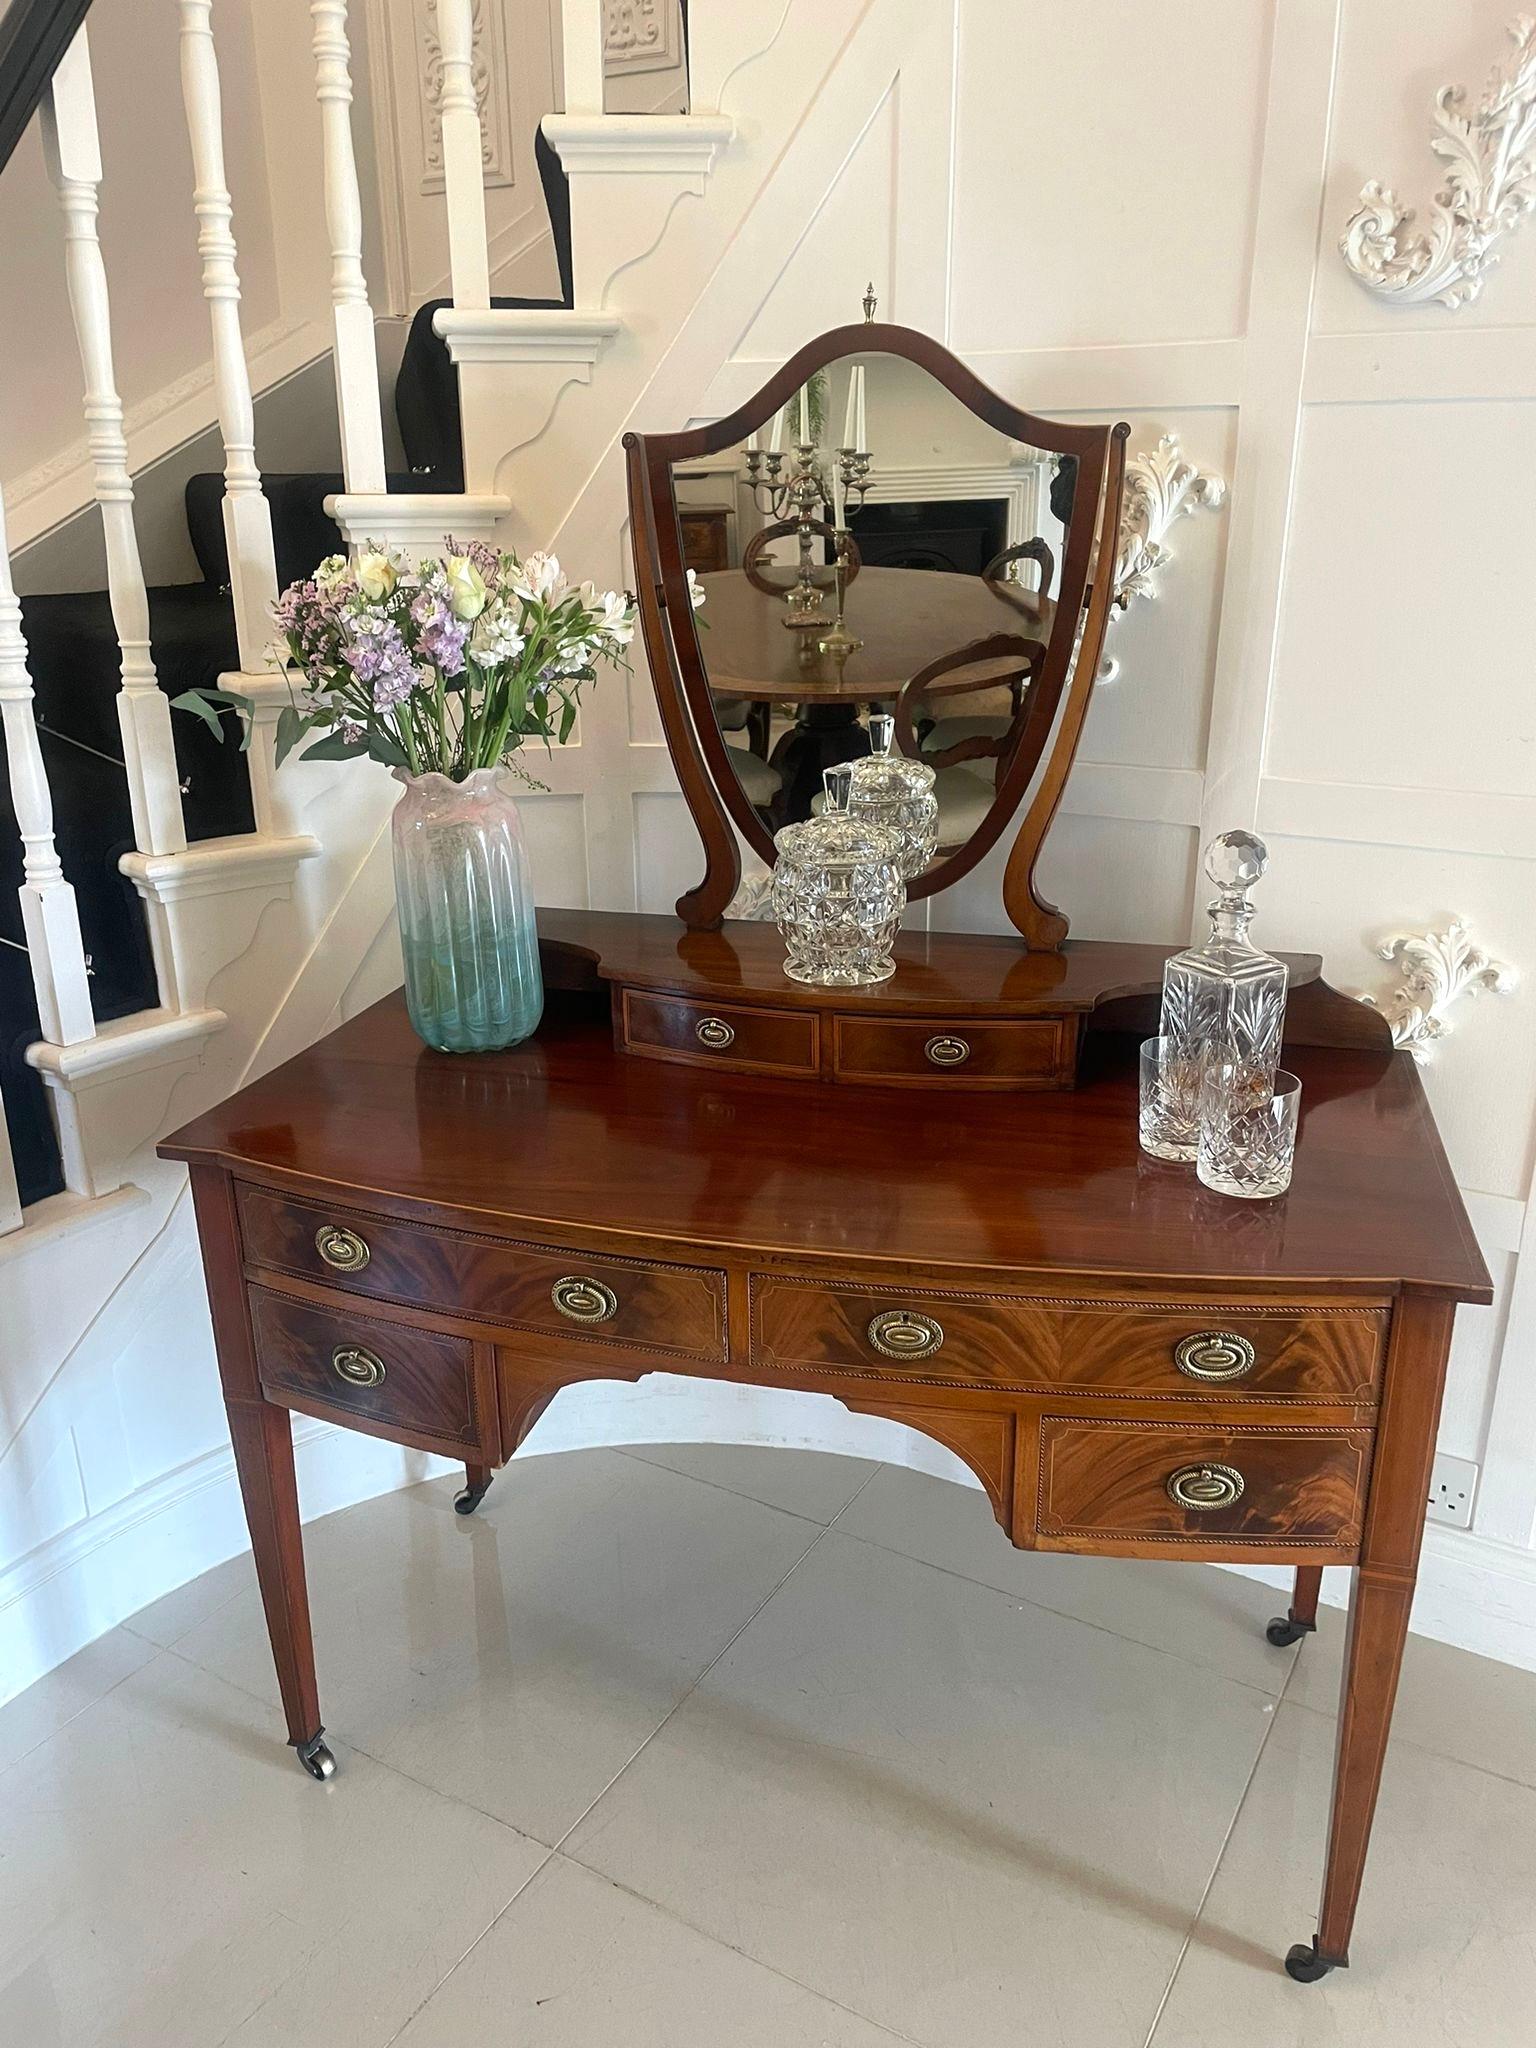 Antique Edwardian quality mahogany inlaid dressing table having a shield shaped adjustable mirror with scroll shaped supports above two small figured mahogany bow fronted drawers crossbanded in satinwood with ornate pretty oval brass handles.  The